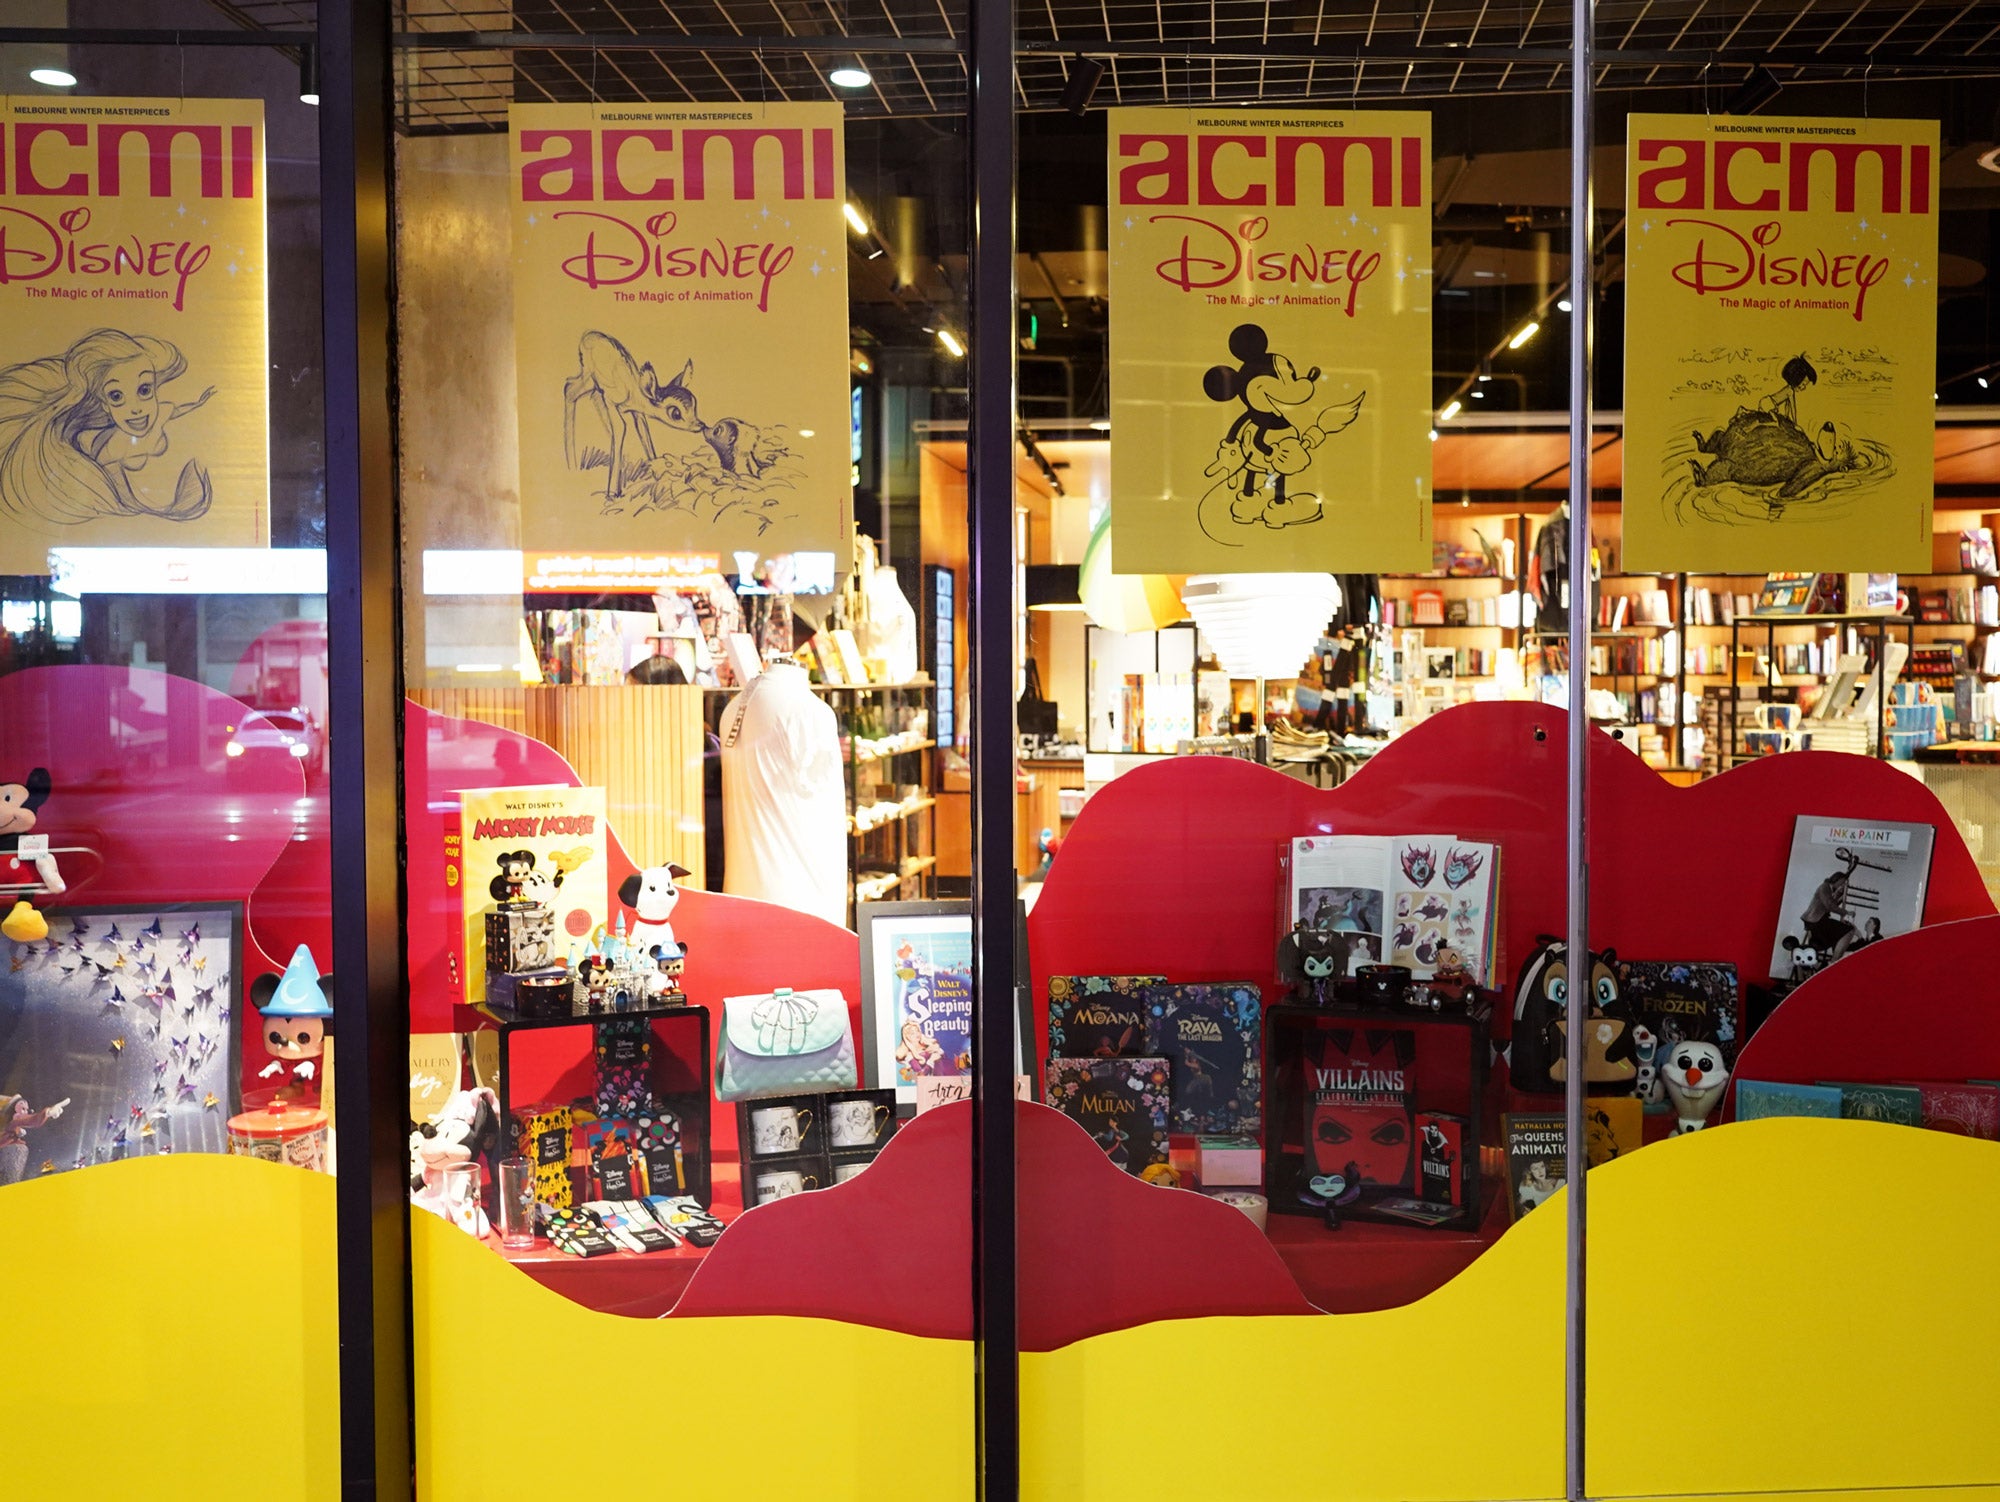 A Disney-themed retail window installation in the ACMI design shop, designed by Kitiya Palaskas Studio, with large red and white abstract window details, red abstract flat set pieces, and lots of Disney products. 